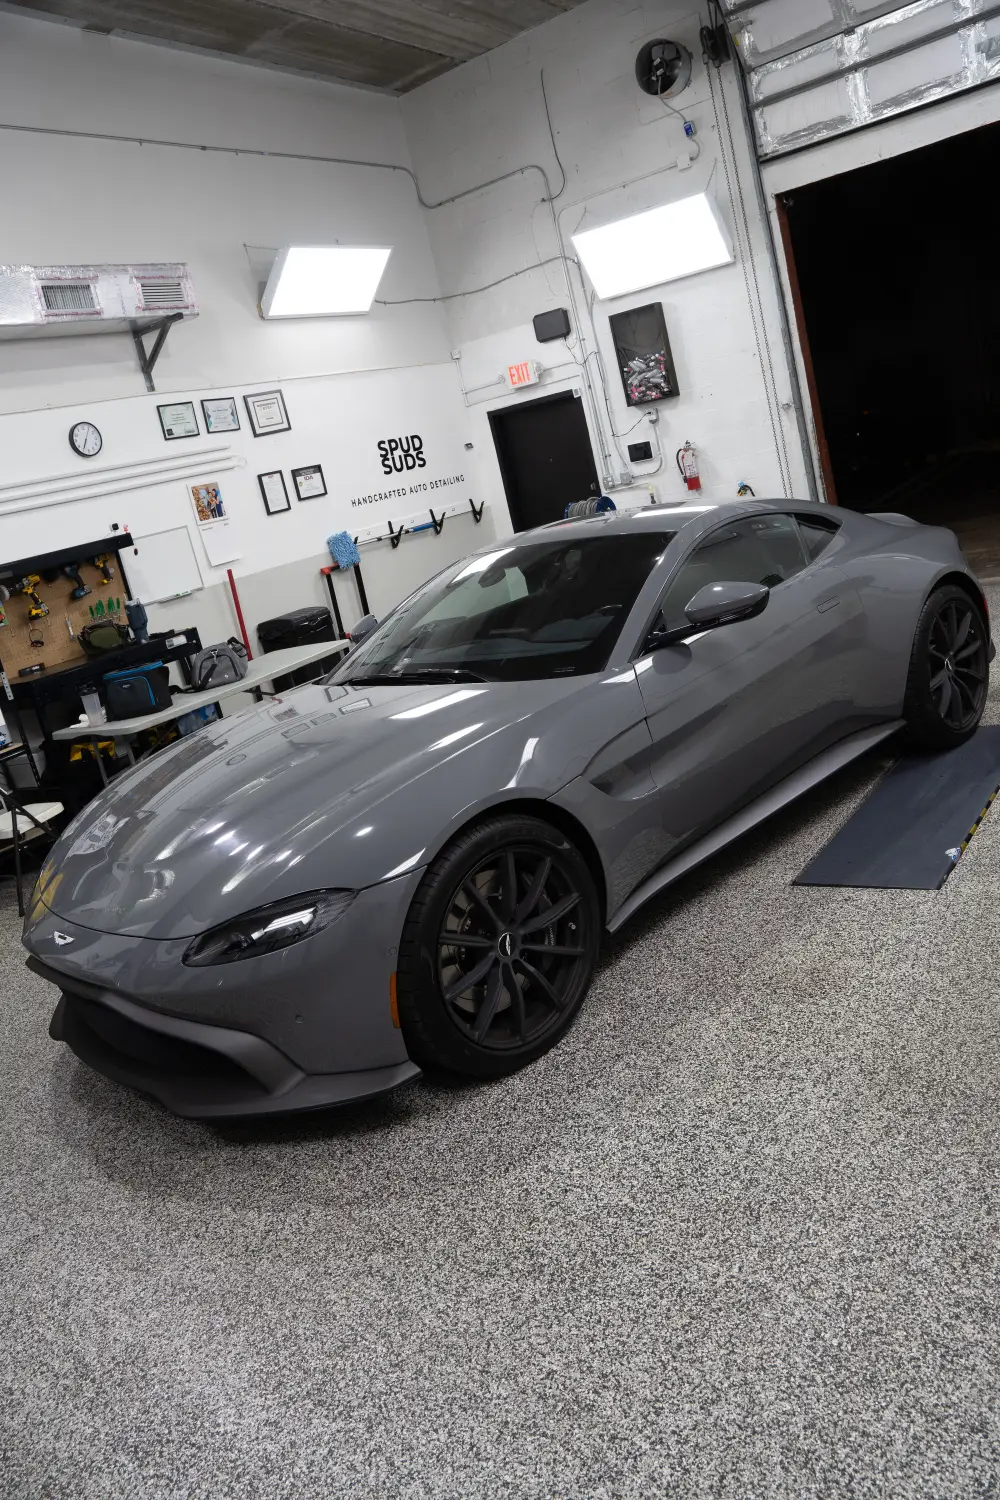 Aston Martin Luxury Vehicle Paint Correction and Ceramic Coating by Spud Suds